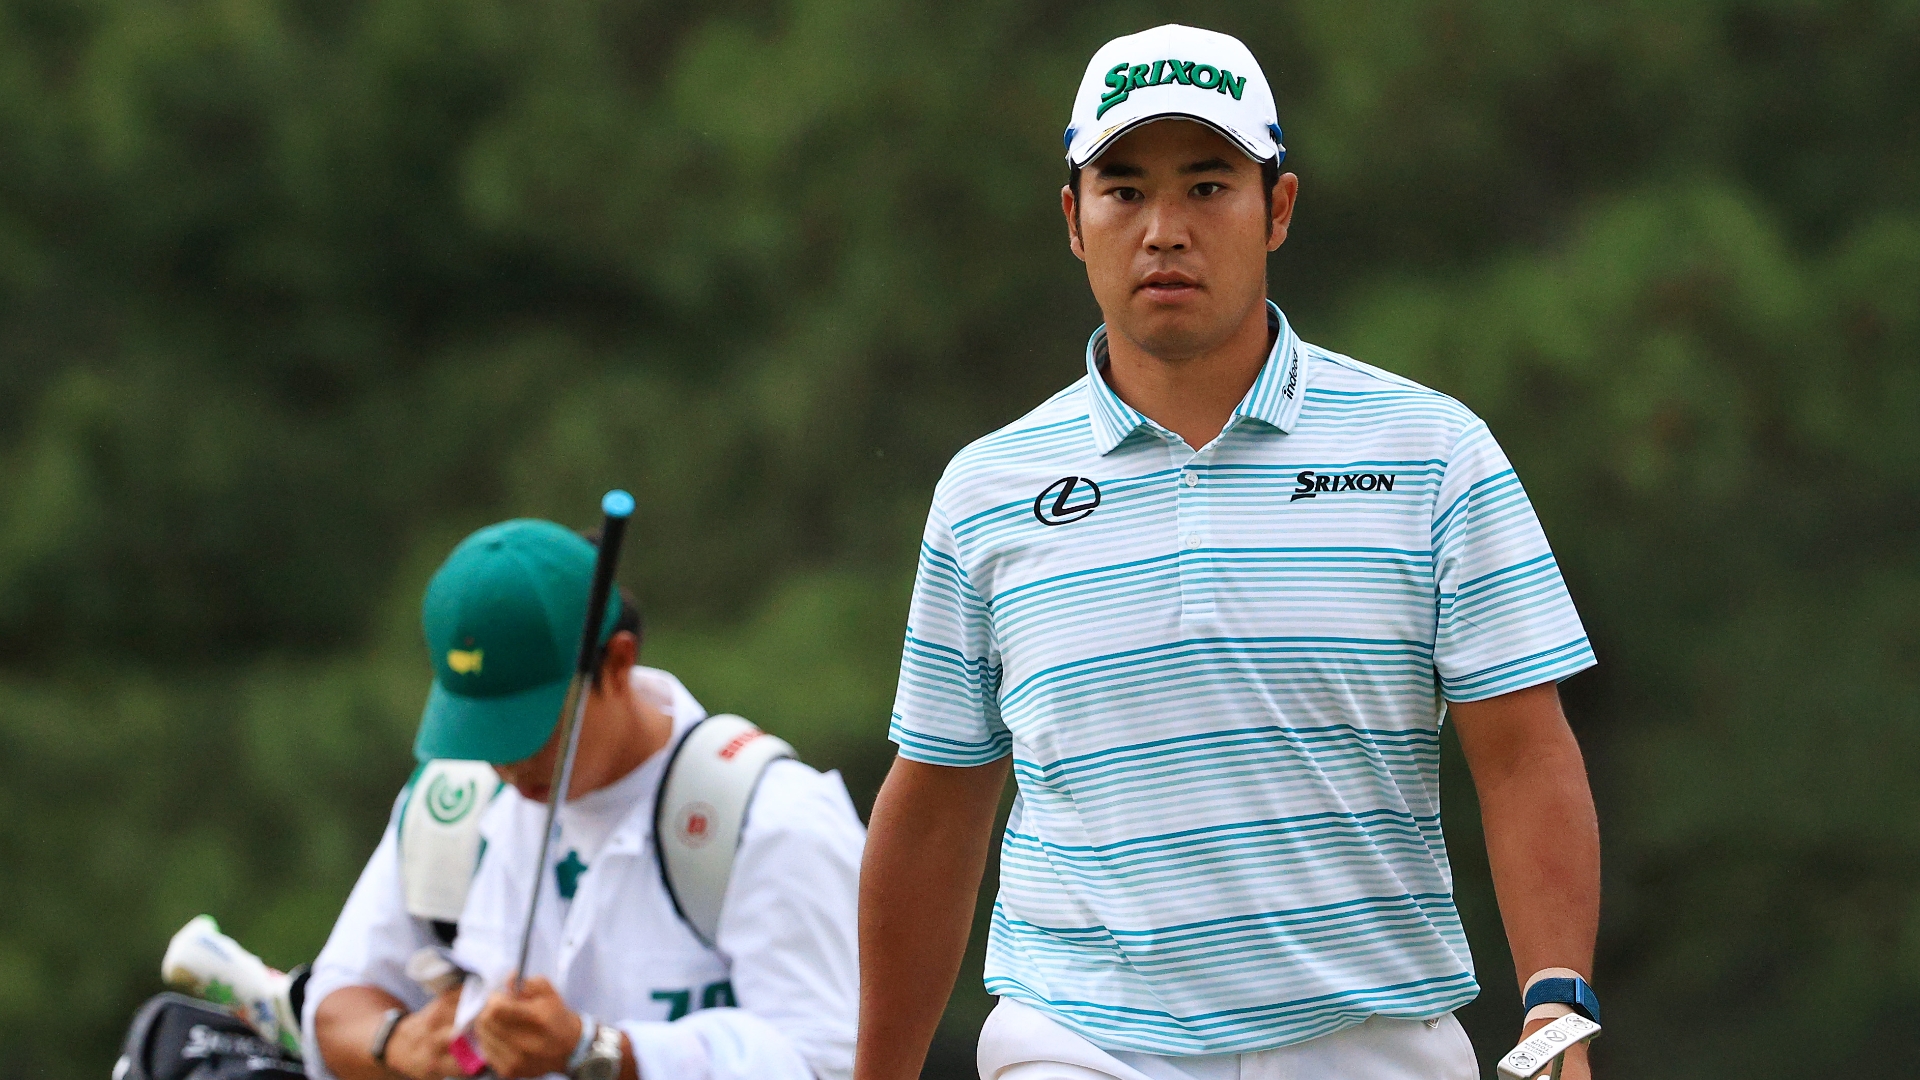 Matsuyama catches fire after delay, shoots 7-under to gain 4-stroke advantage